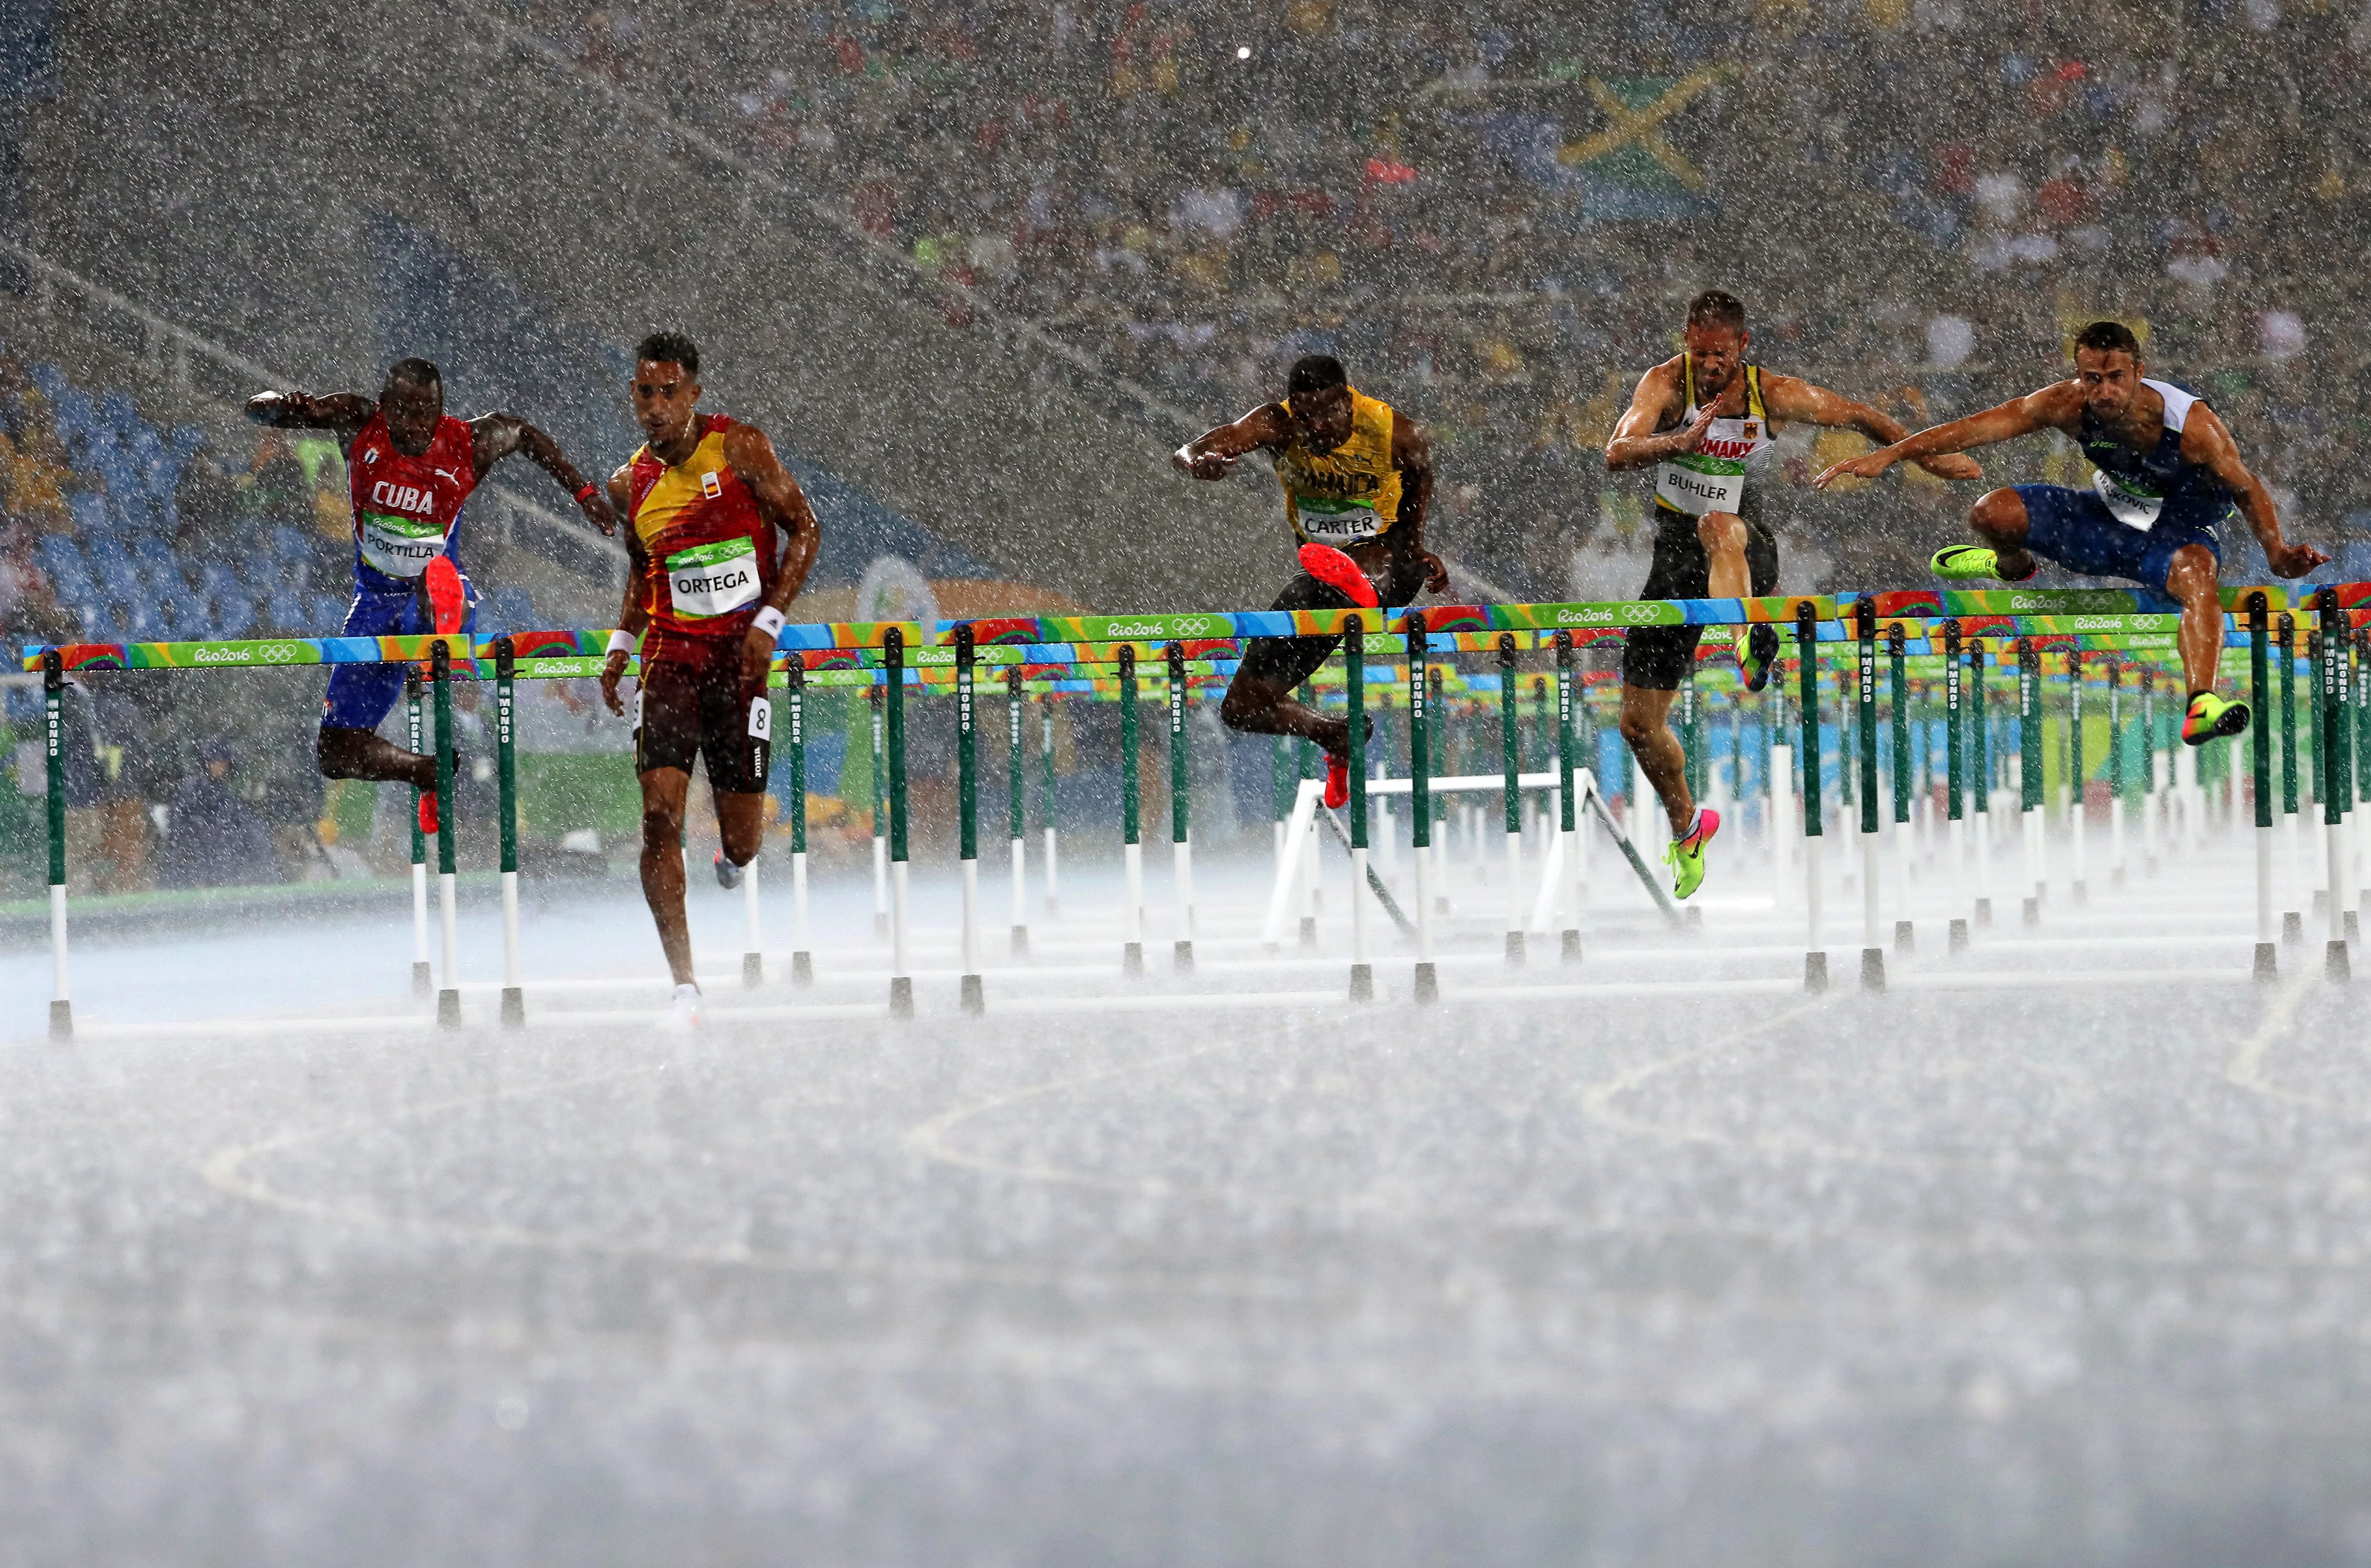 8 stunning photos from the rainsoaked track and field events at the